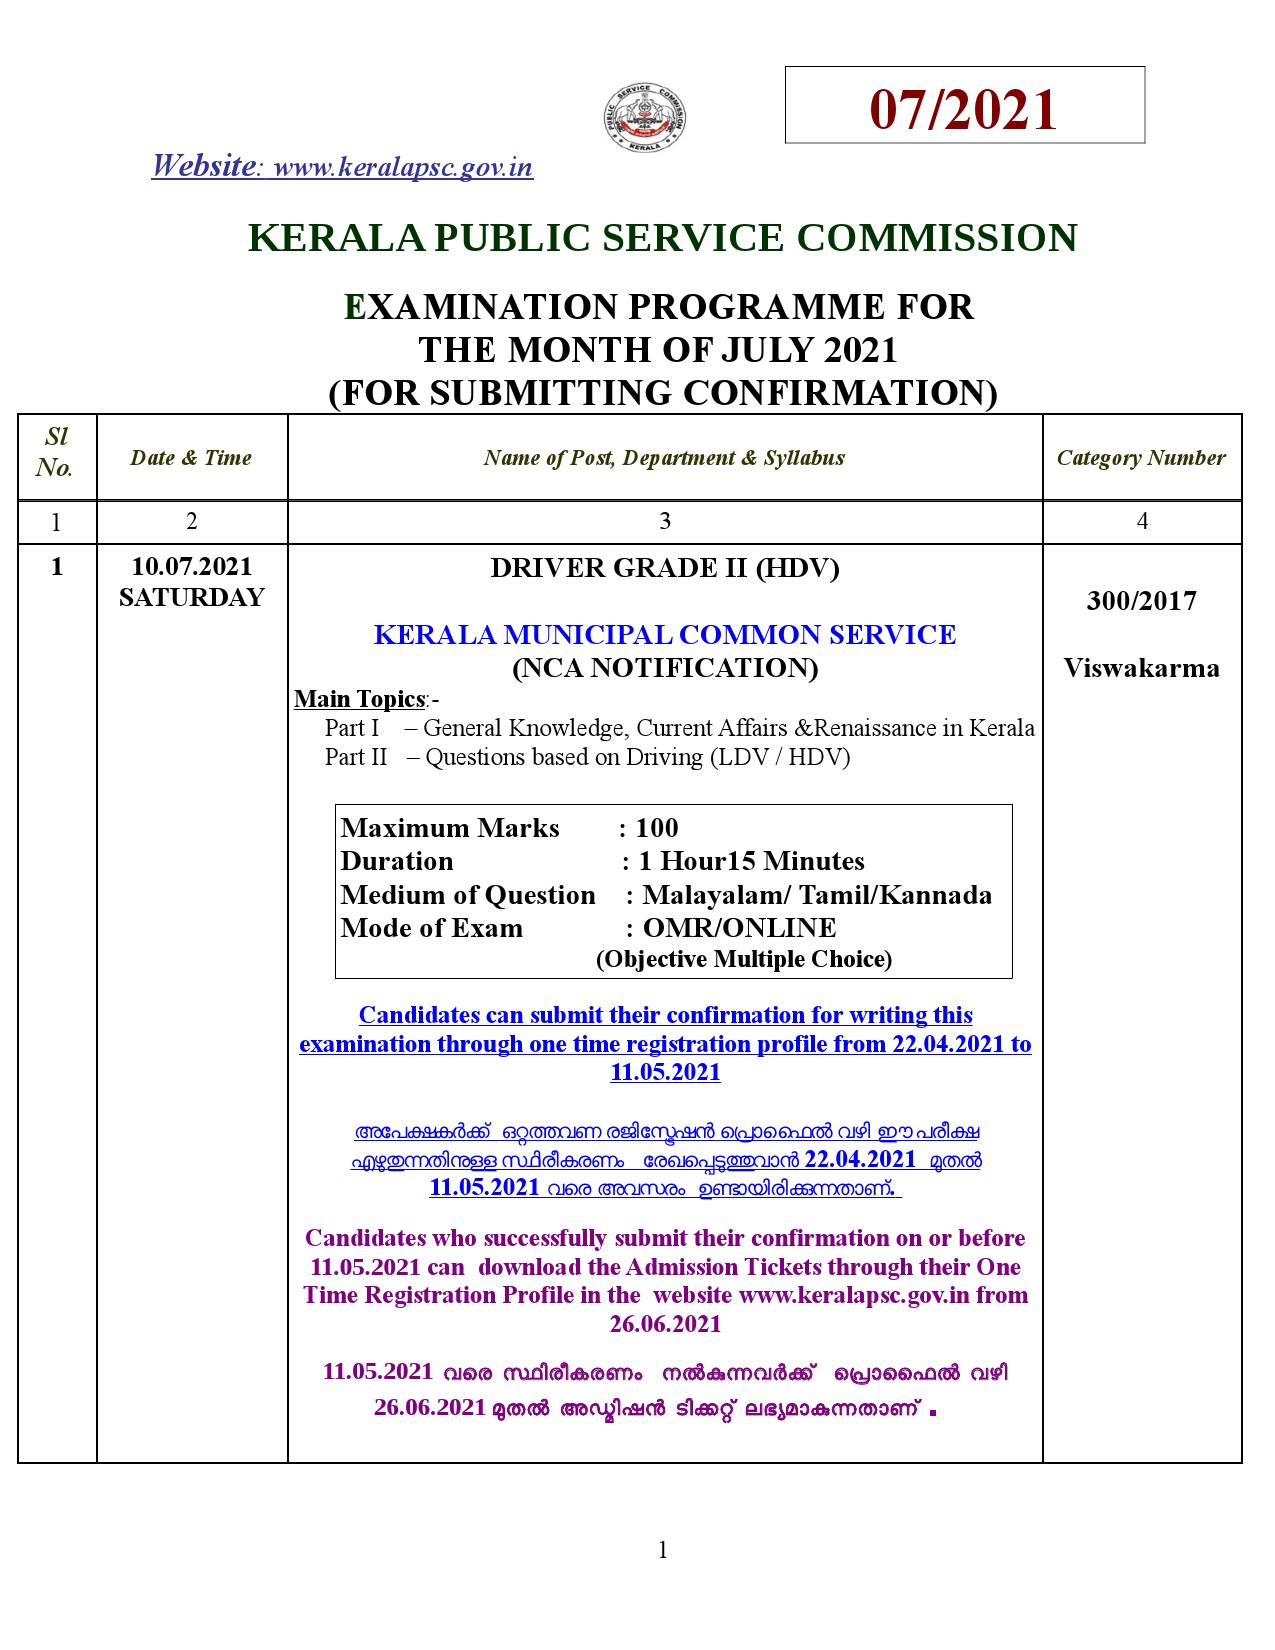 KPSC Examination Programme For The Month Of July 2021 - Notification Image 1